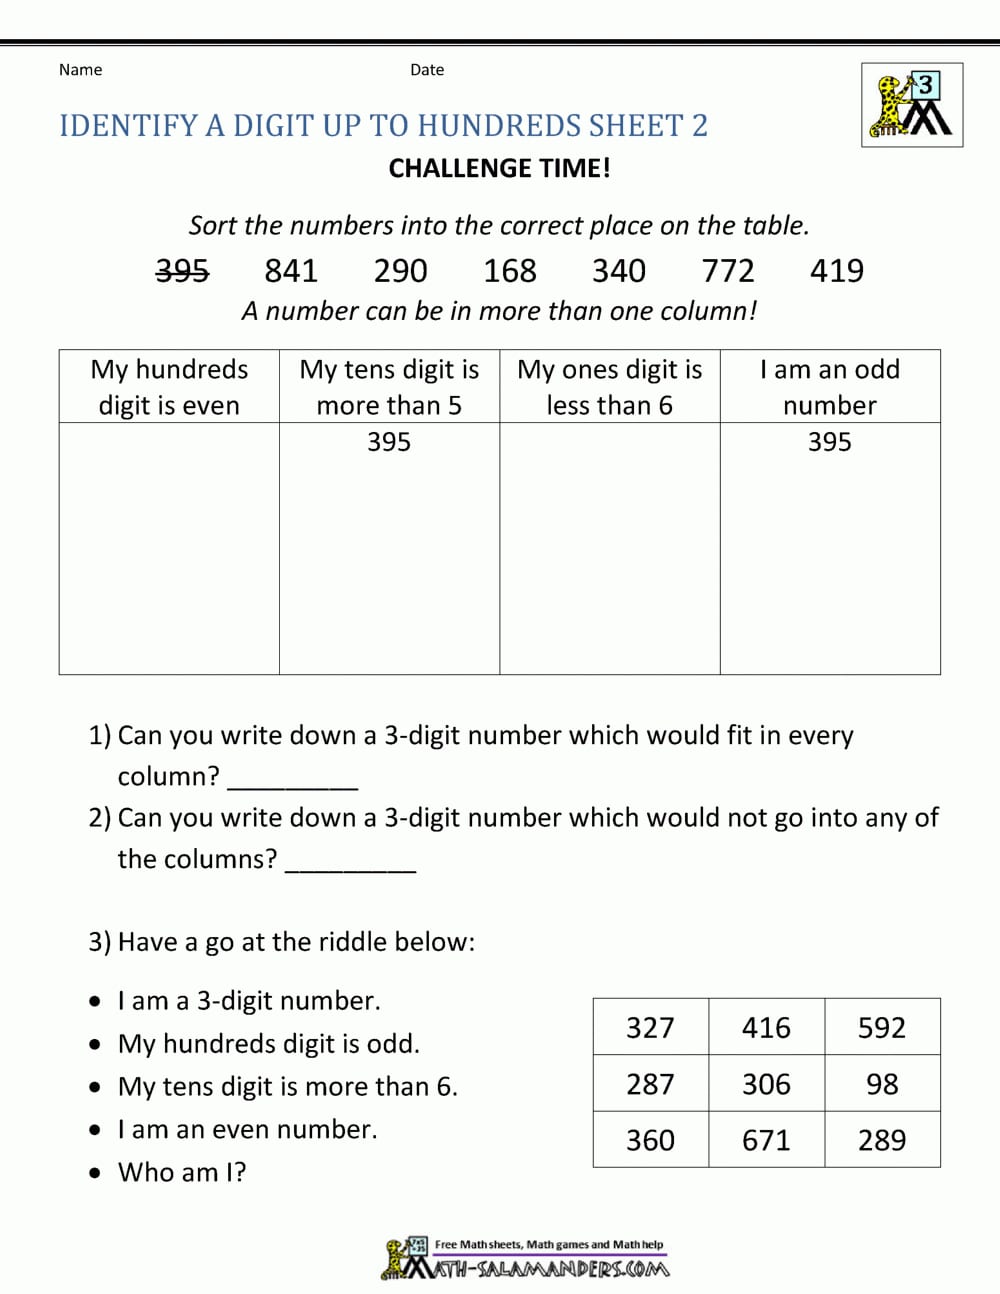 second-grade-place-value-worksheets-db-excel